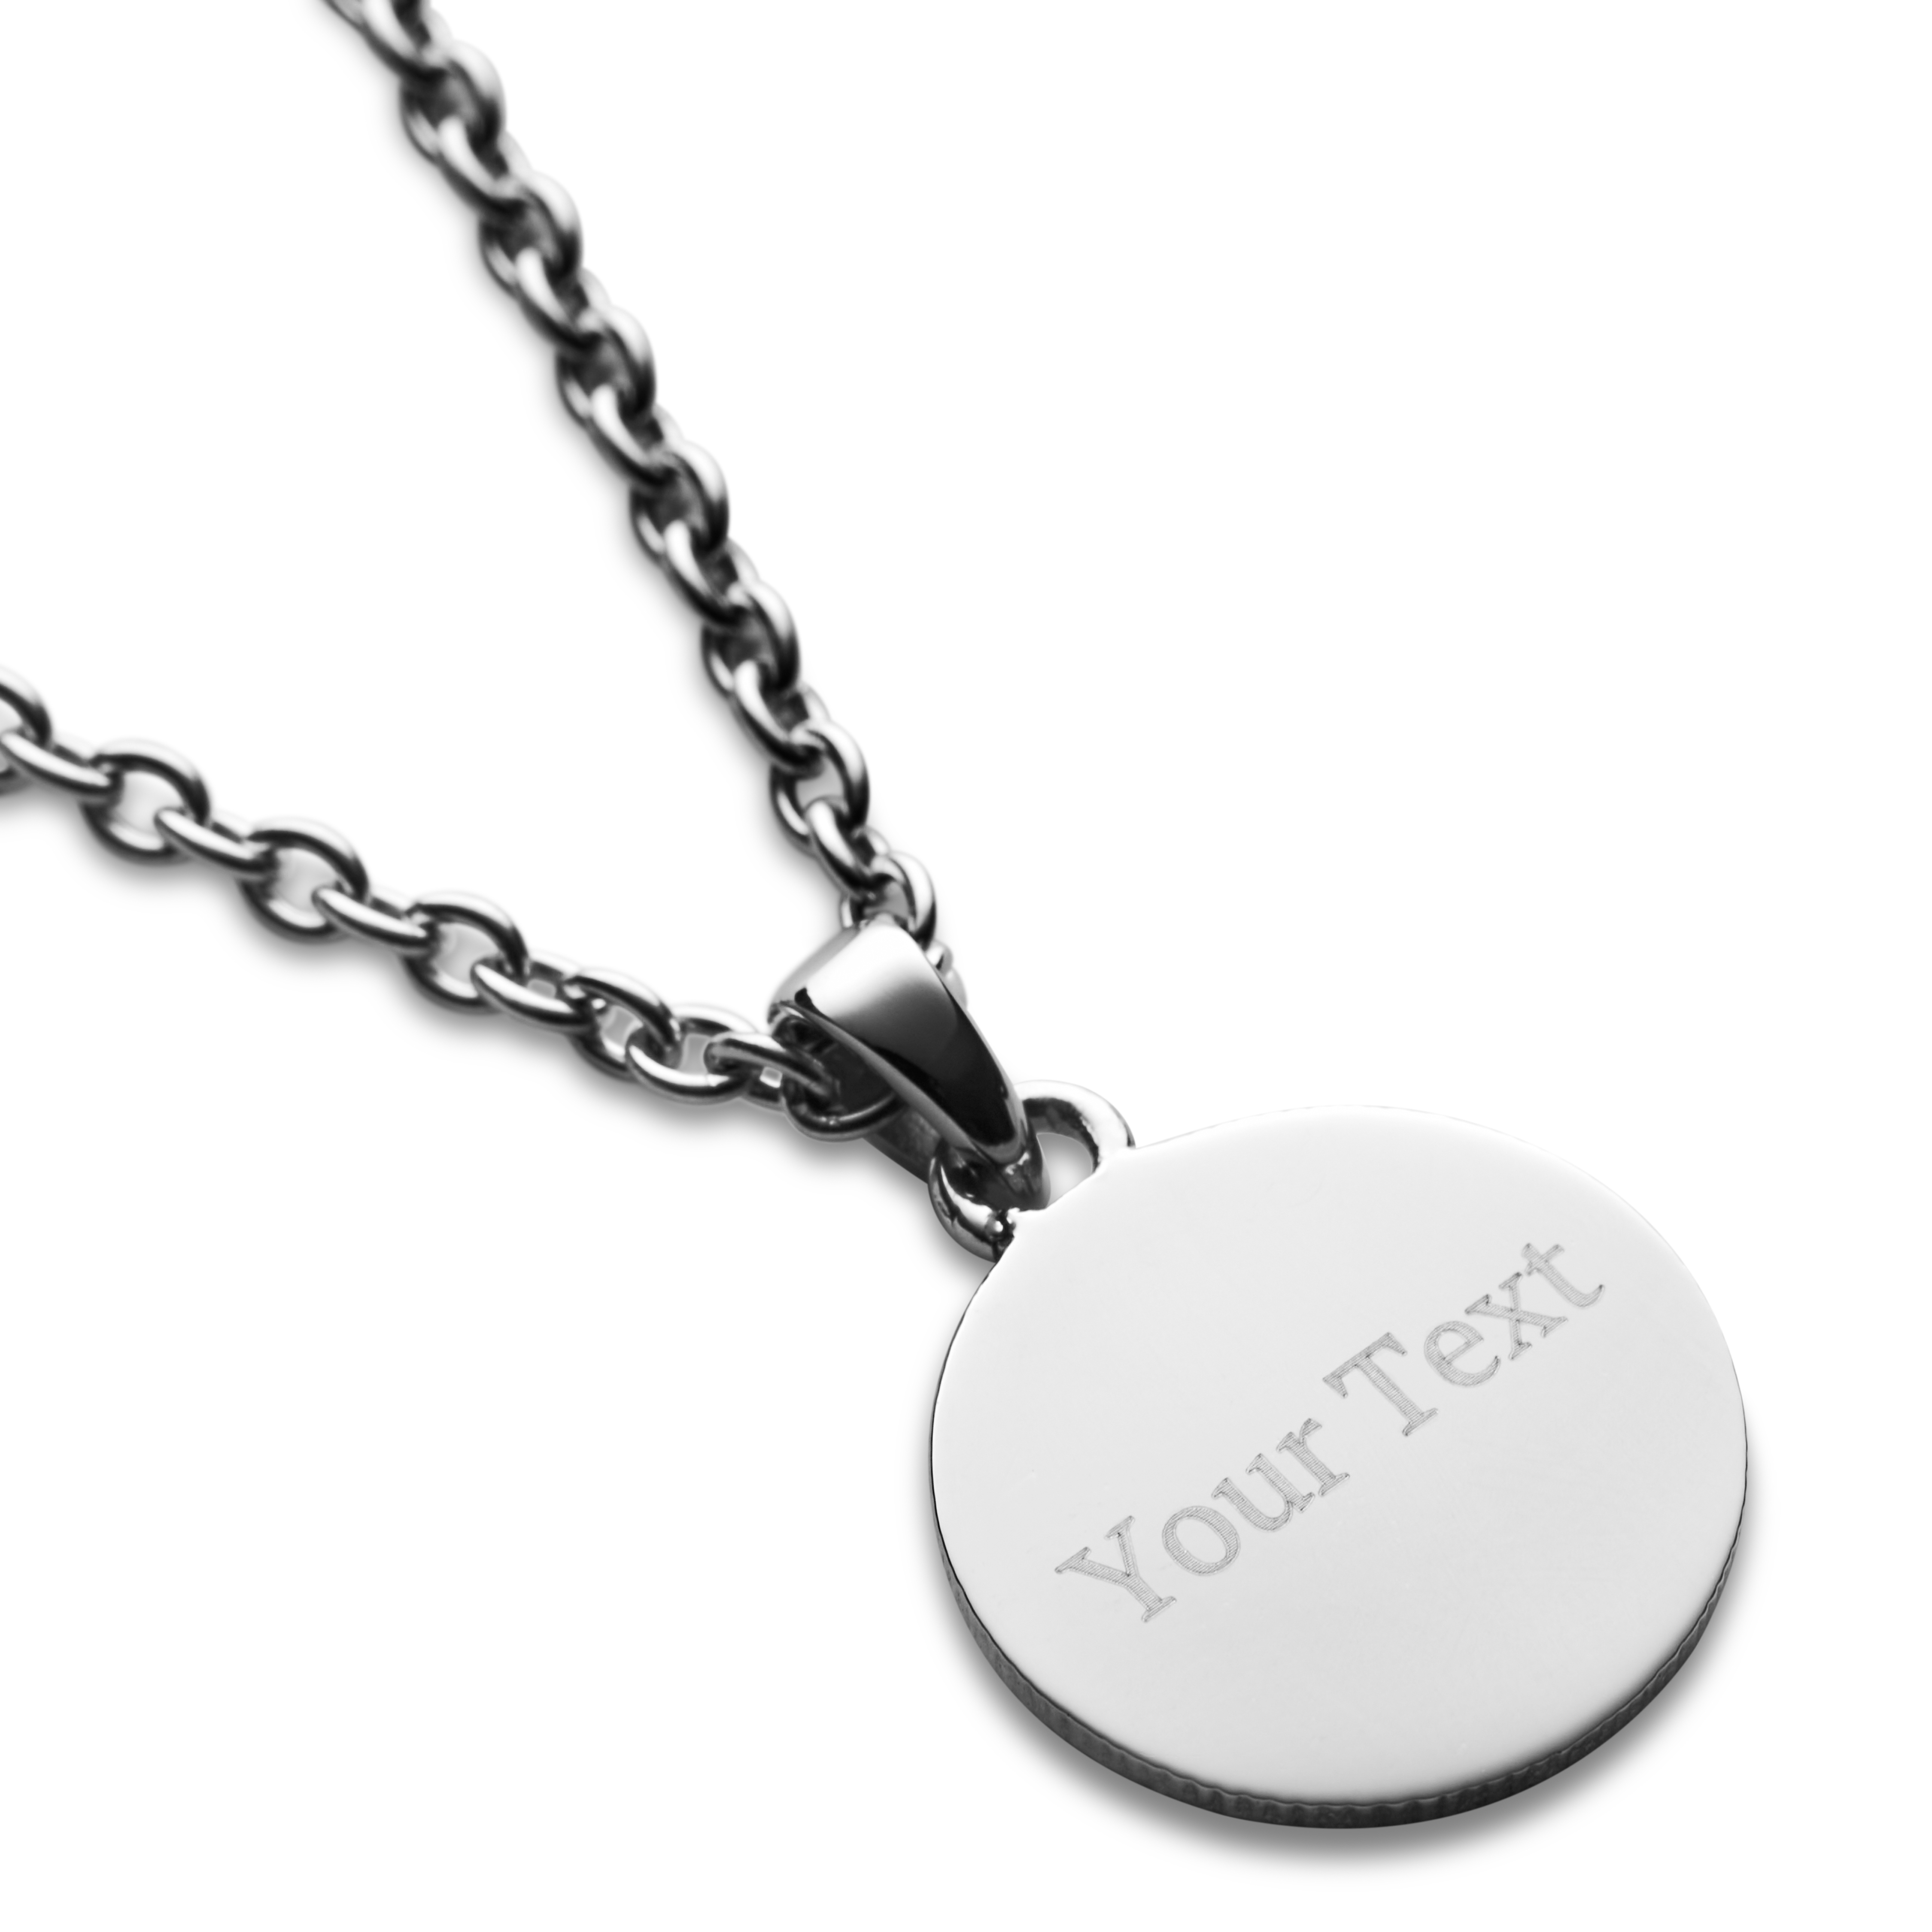 Lucleon Men's Engravable Dog Tag Cable Chain Necklace